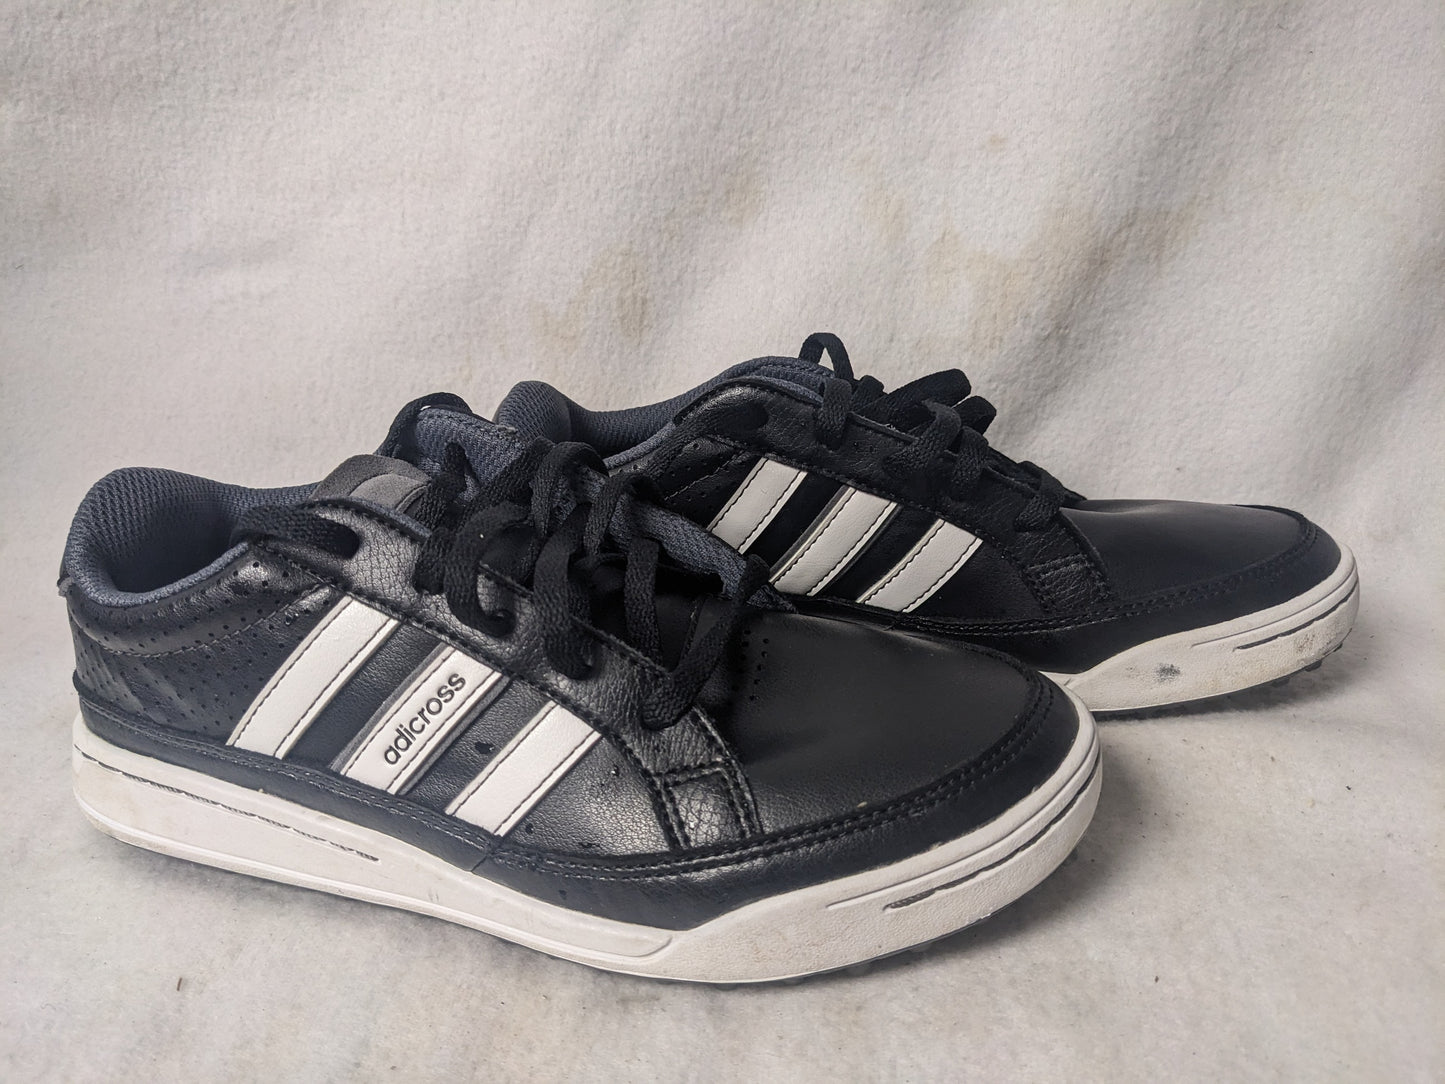 Adidas Adicross Athletic Shoes Size 4 Color Black Condition Used